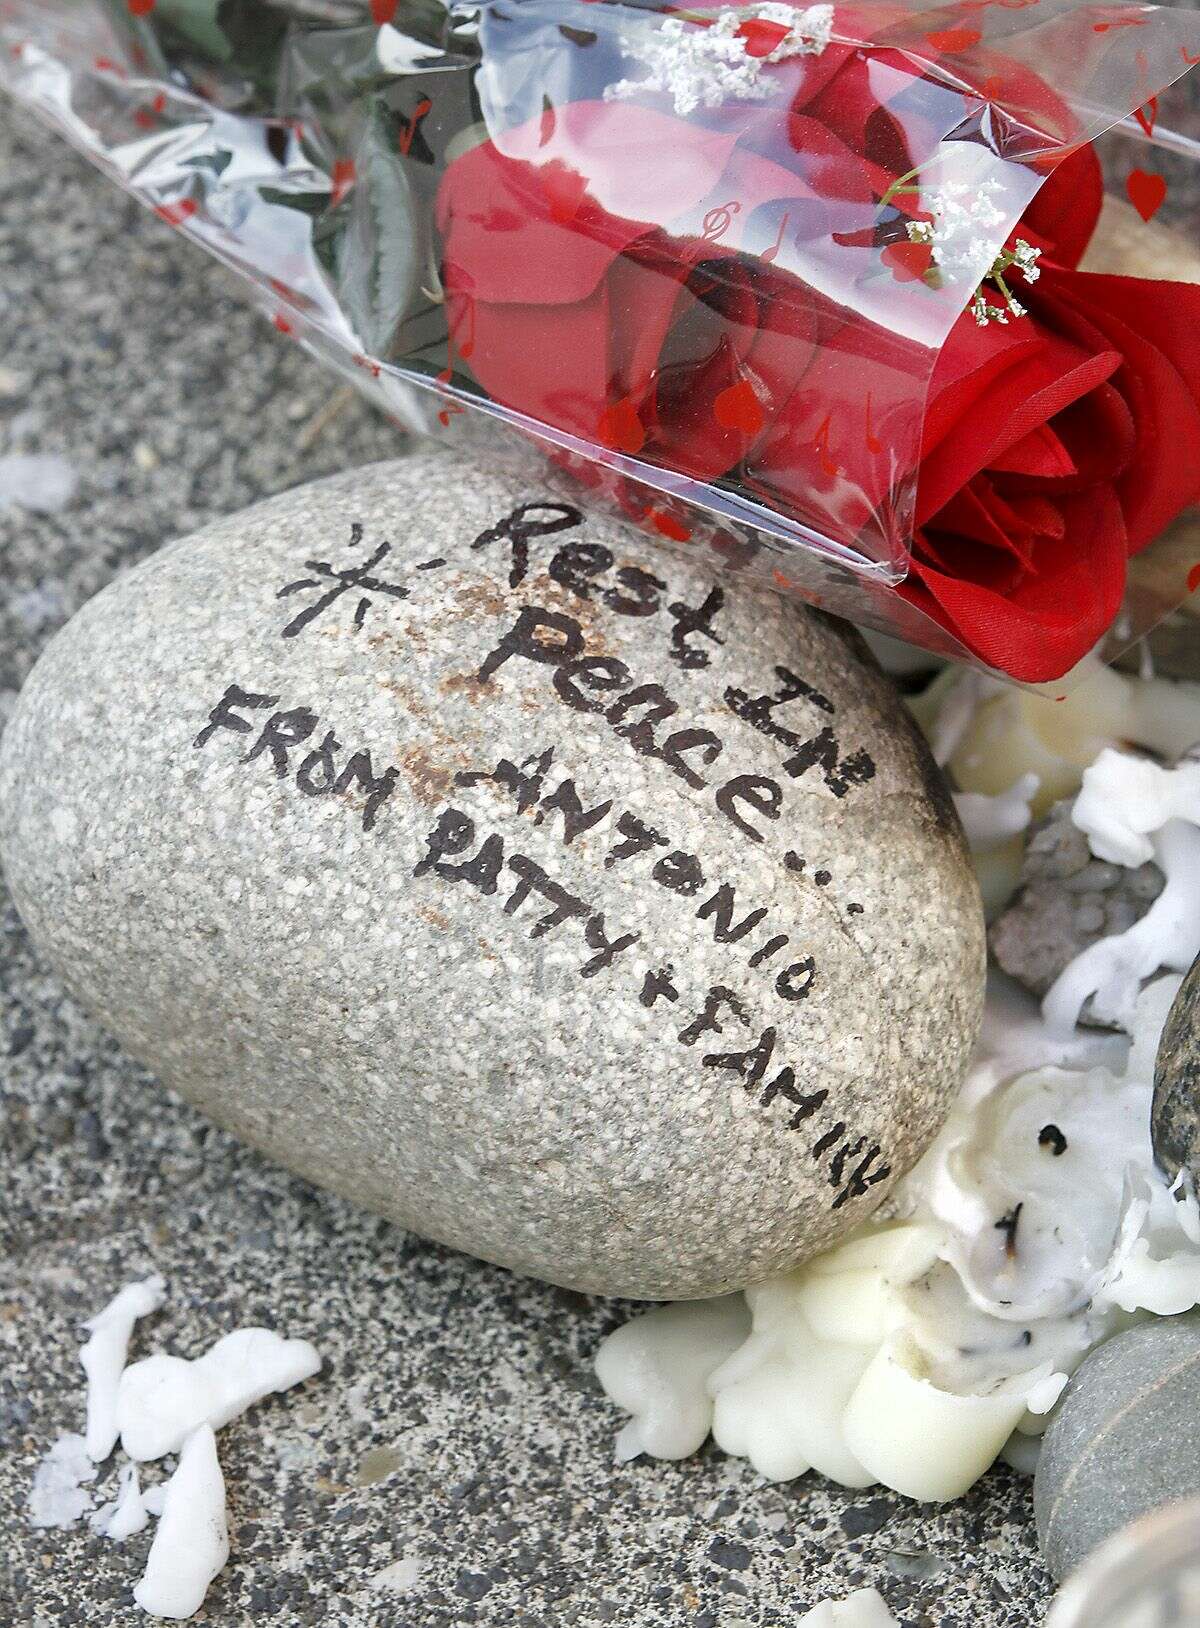 Melted candle wax, a rock and roses are part of an impromptu memorial for Antonio Zambrano-Montes set up on the sidewalk Thursday Feb. 12, 2015 outside of Vinny's Bakery & Cafe in Pasco Wash. It's at the site where the Pasco man was shot and killed by police officers on February 10, 2015. Four people have been shot and killed by police in recent months in this agricultural city of 68,000 in southeastern Washington, and the most recent death of an orchard worker accused of throwing rocks at officers has sparked protests after witnesses said he was running away. (AP Photo/The Tri-City, Herald, Bob Brawdy)